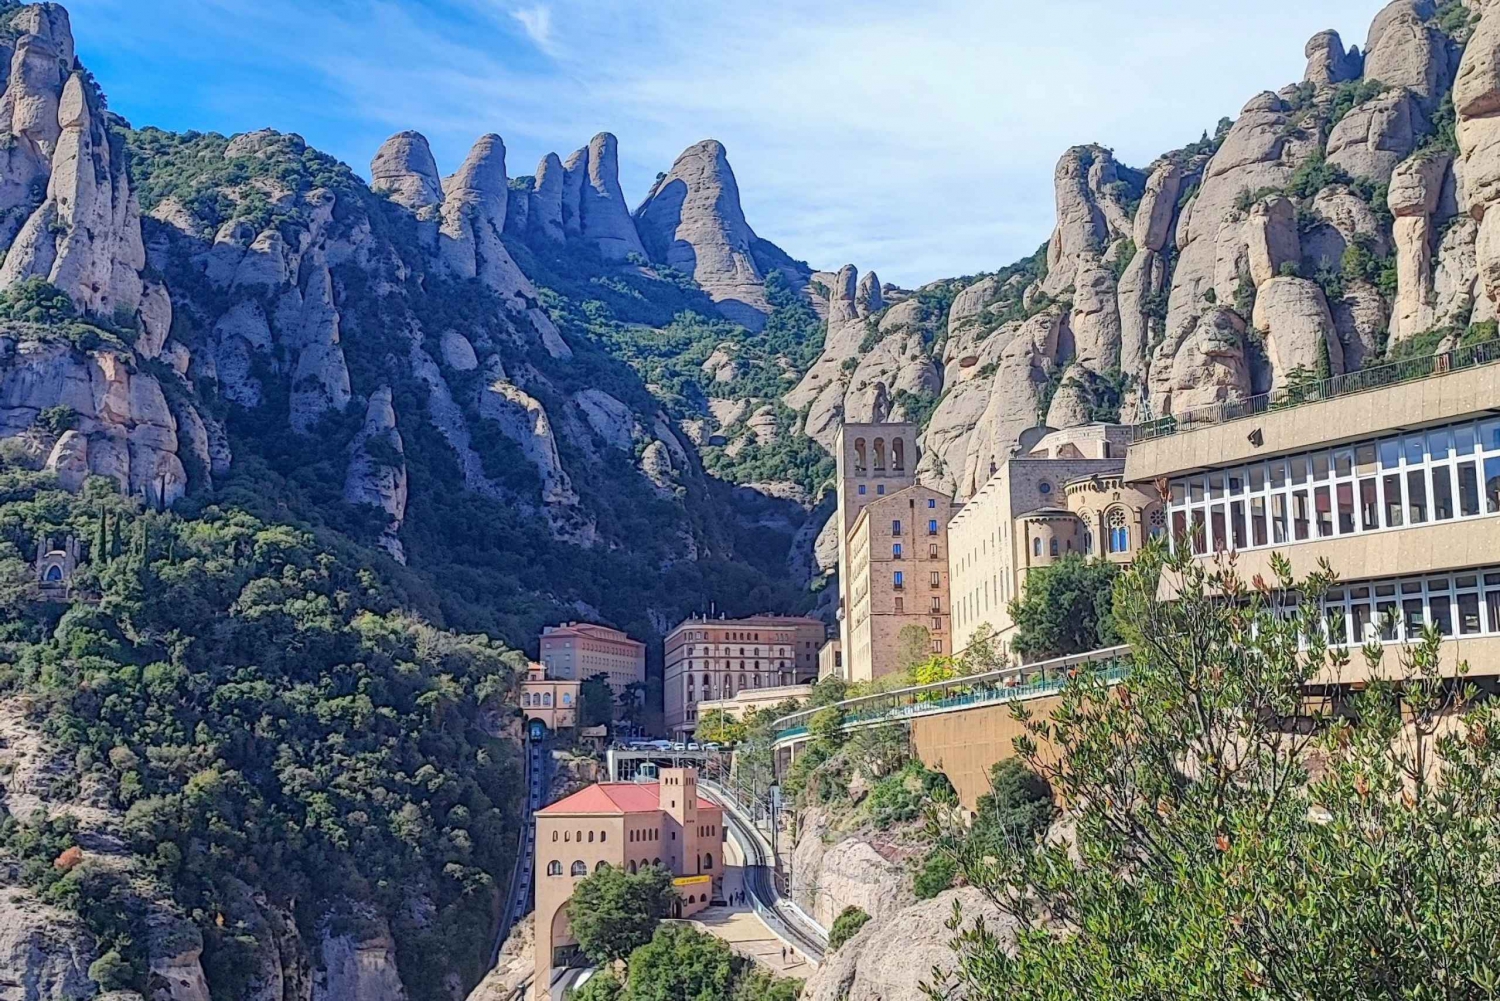 Montserrat Small Group Tour with Train and Cable Car